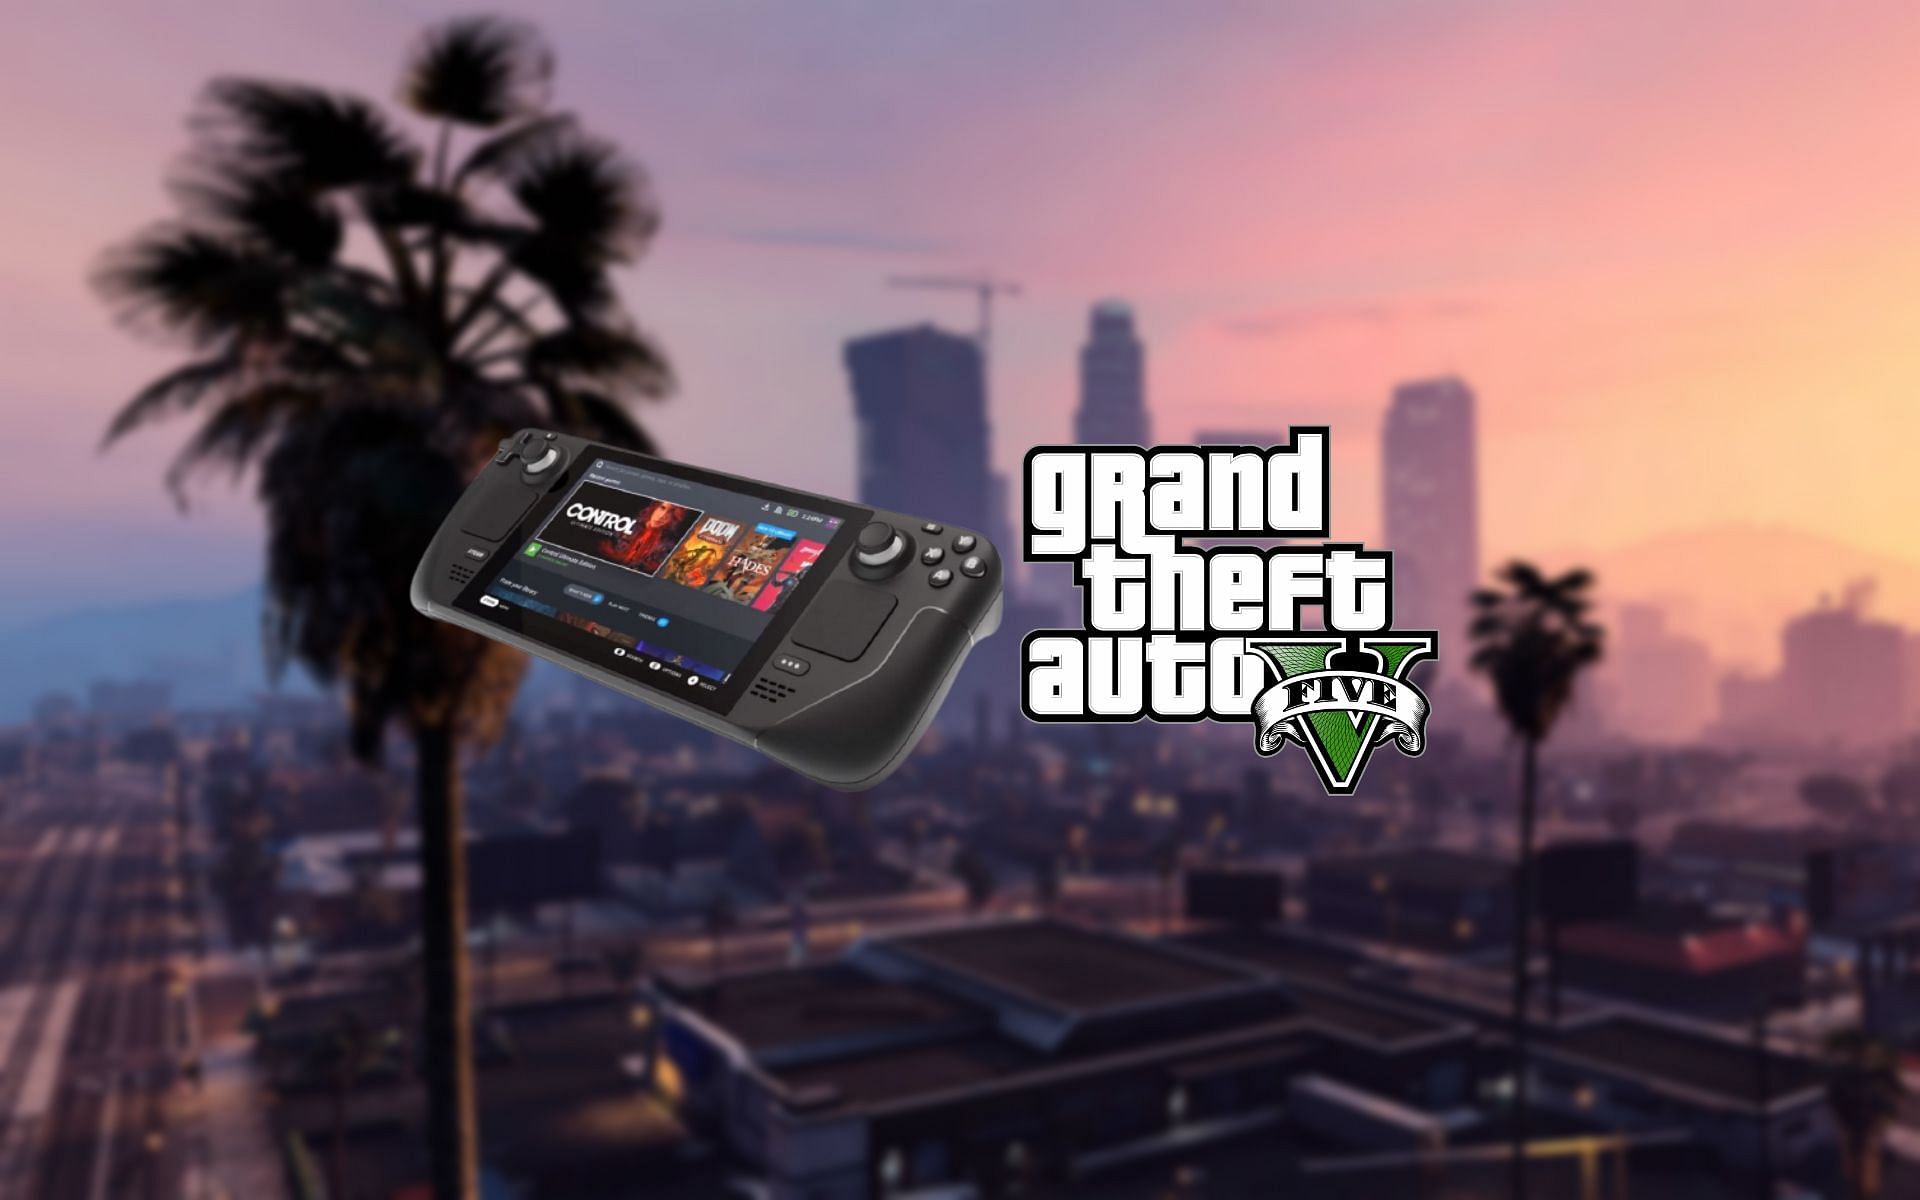 Grand Theft Auto 5 handheld might have just become a reality (Image via Sportskeeda)